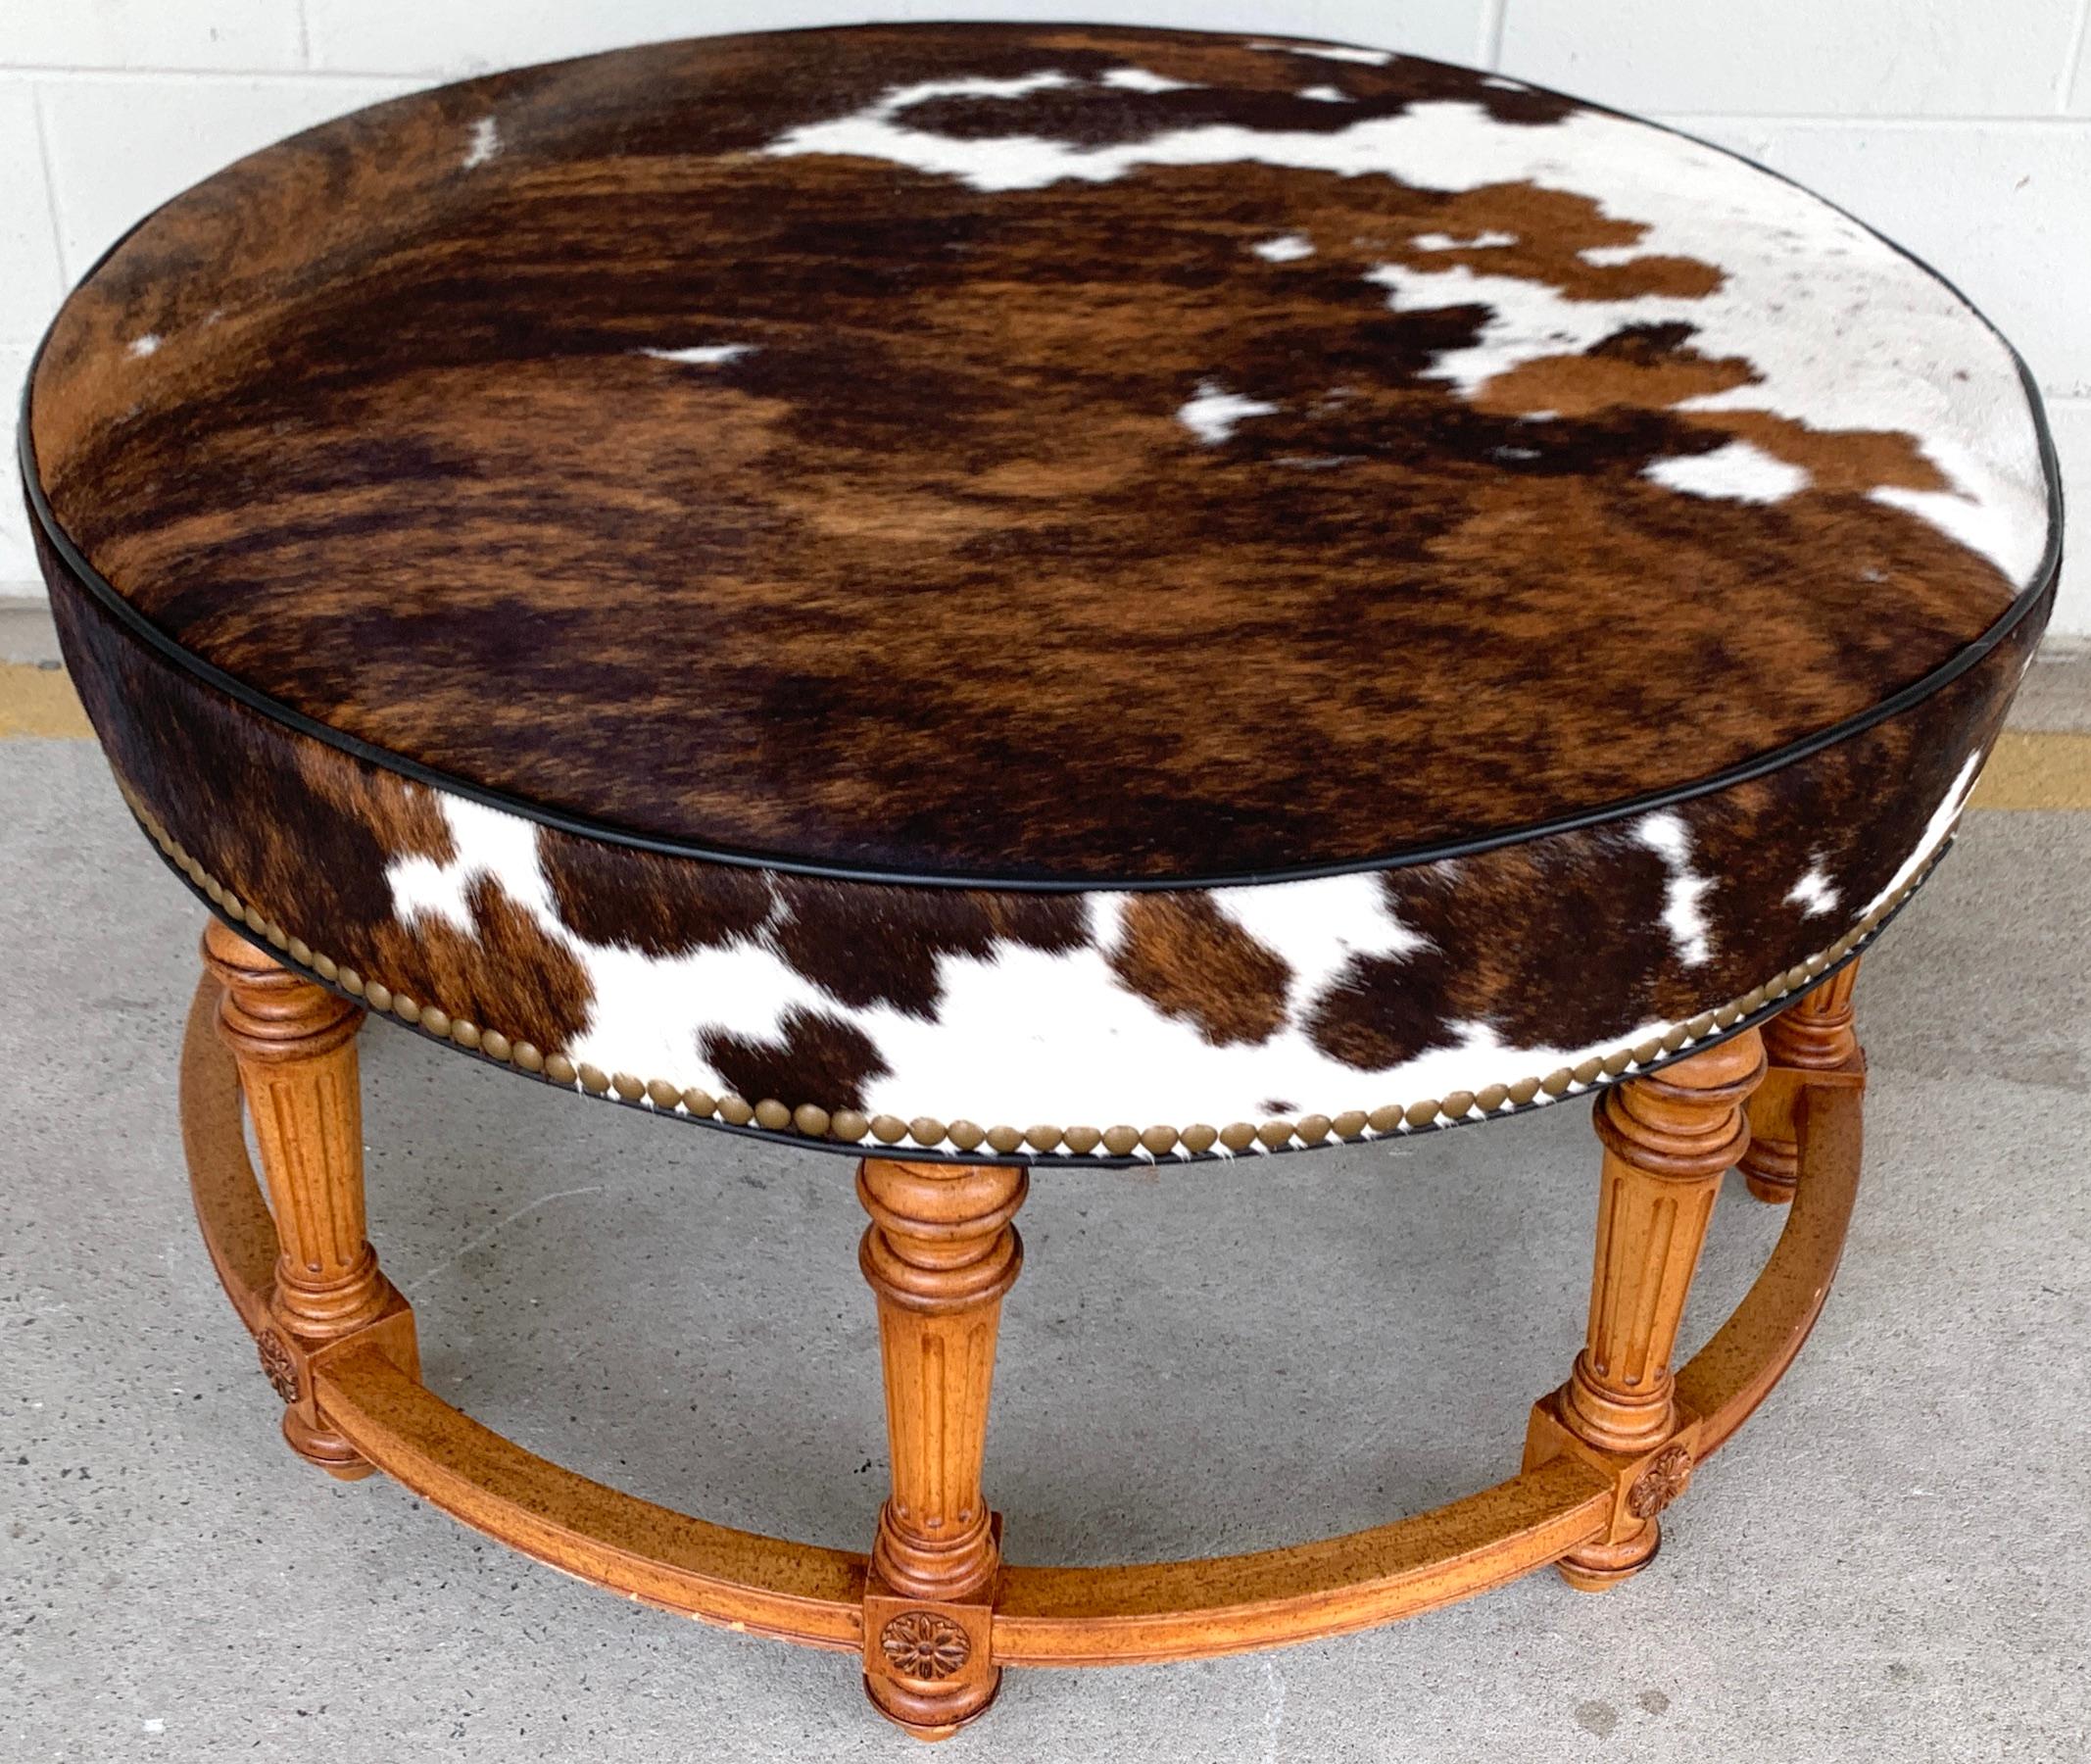 Cowhide ottoman by Hancock and Moore, exceptional cowhide, with leather binding raised on six fluted legs joined by a circular stretcher.
   